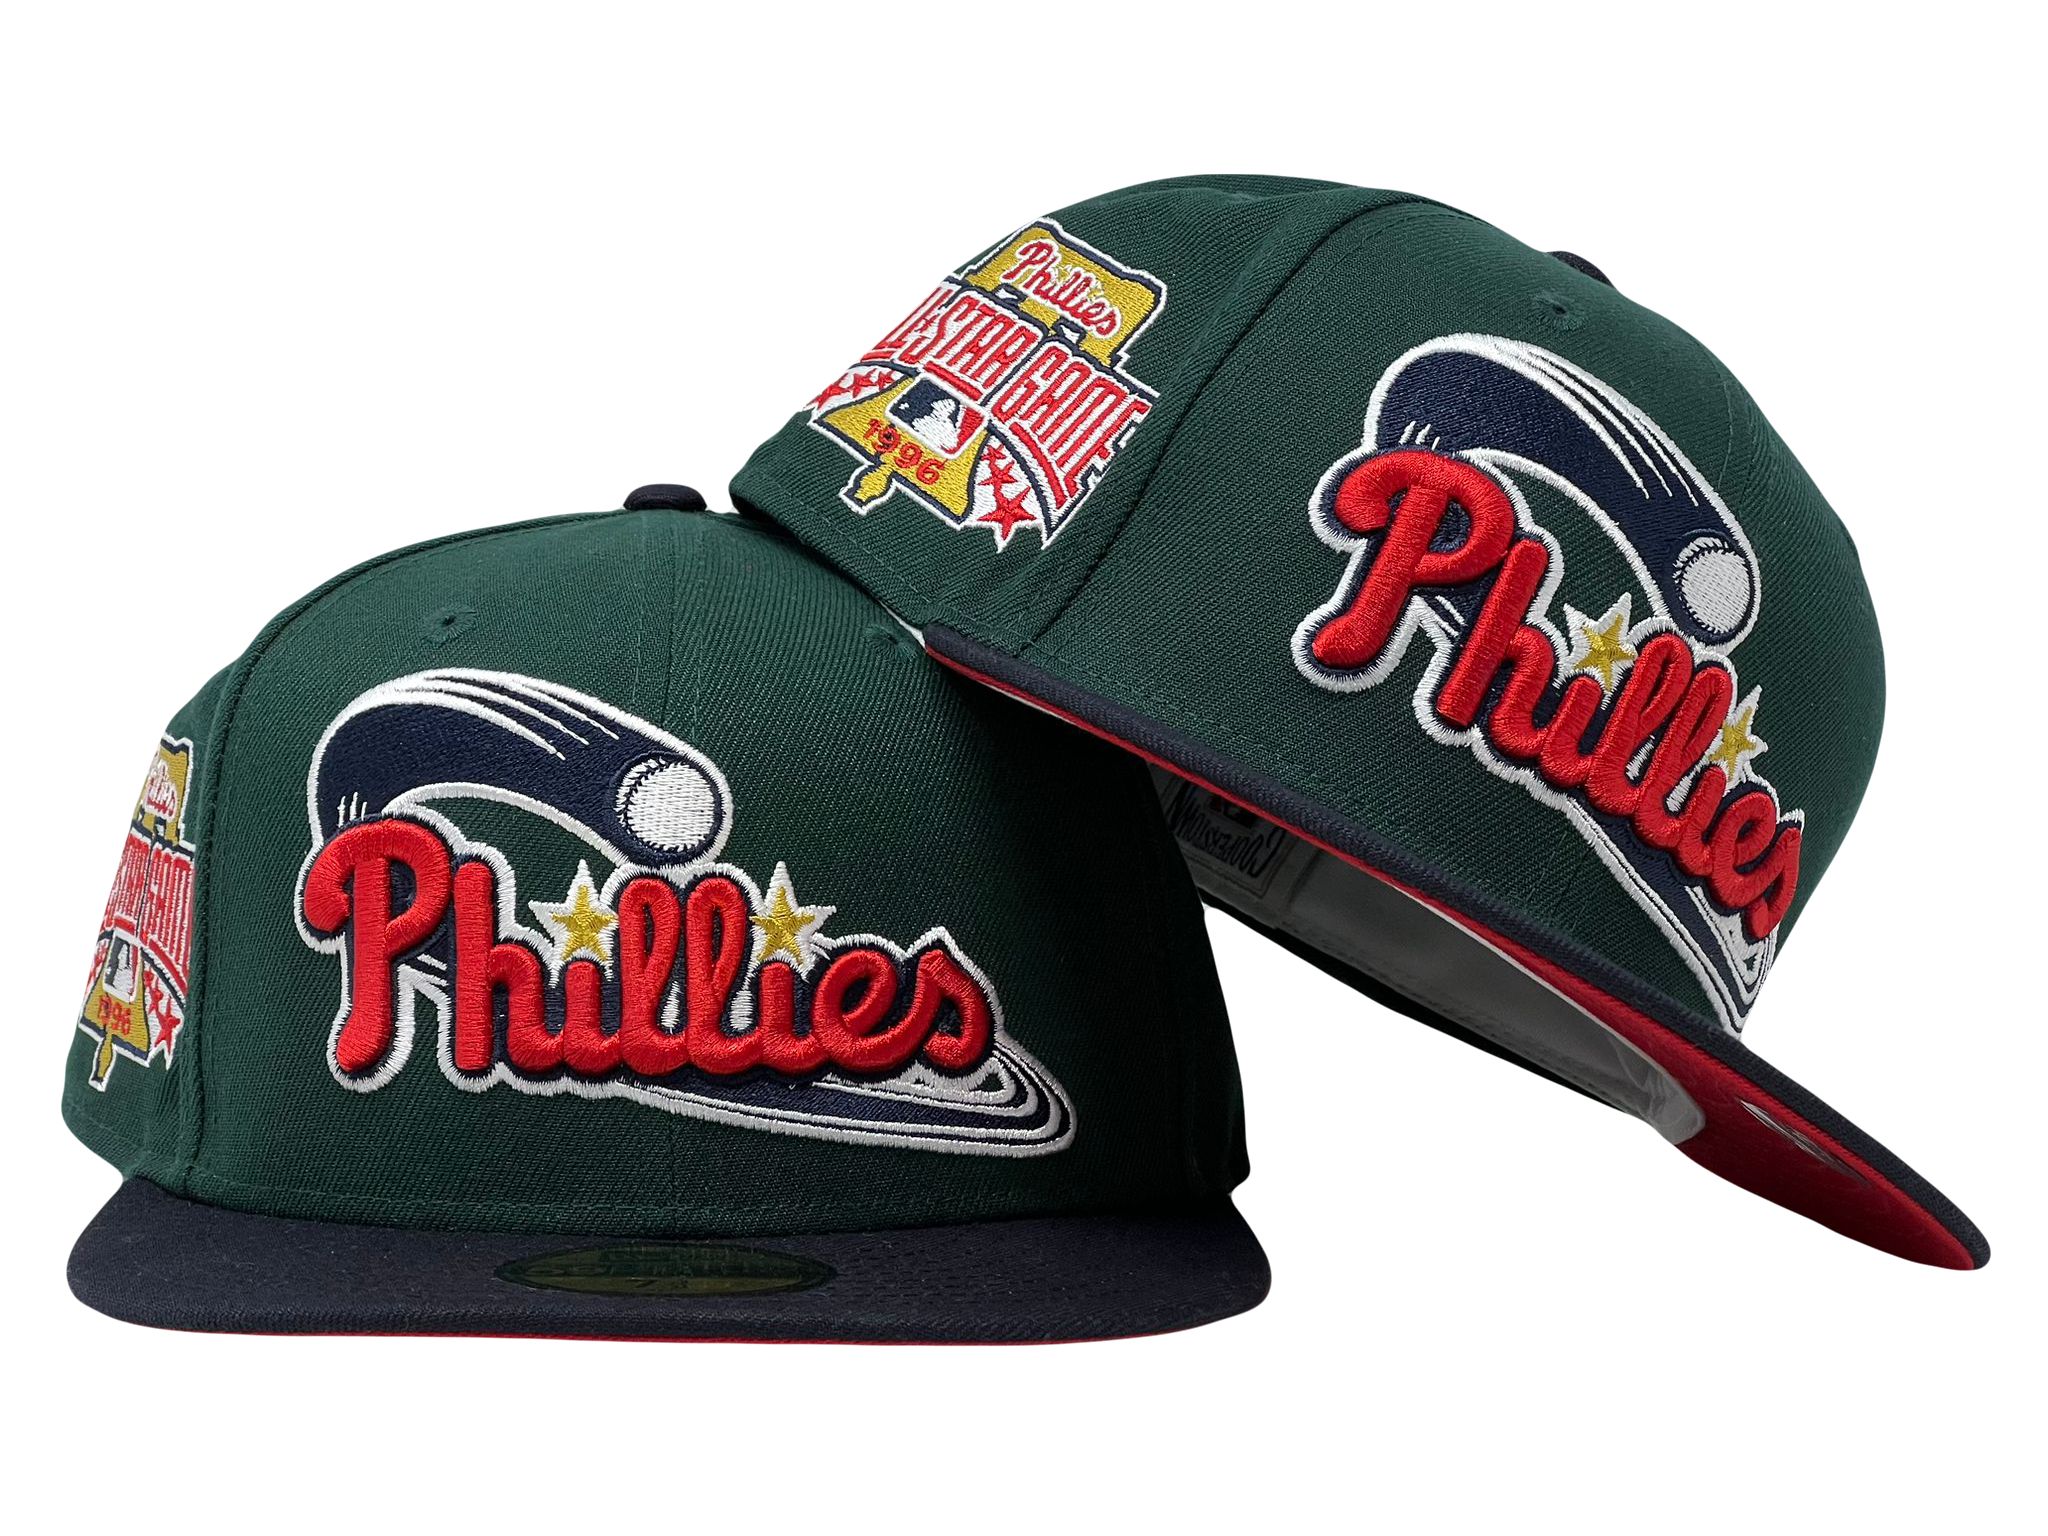 Philadelphia Phillies Memory 59FIFTY 96asg Chrome/Navy Fitted - New Era cap